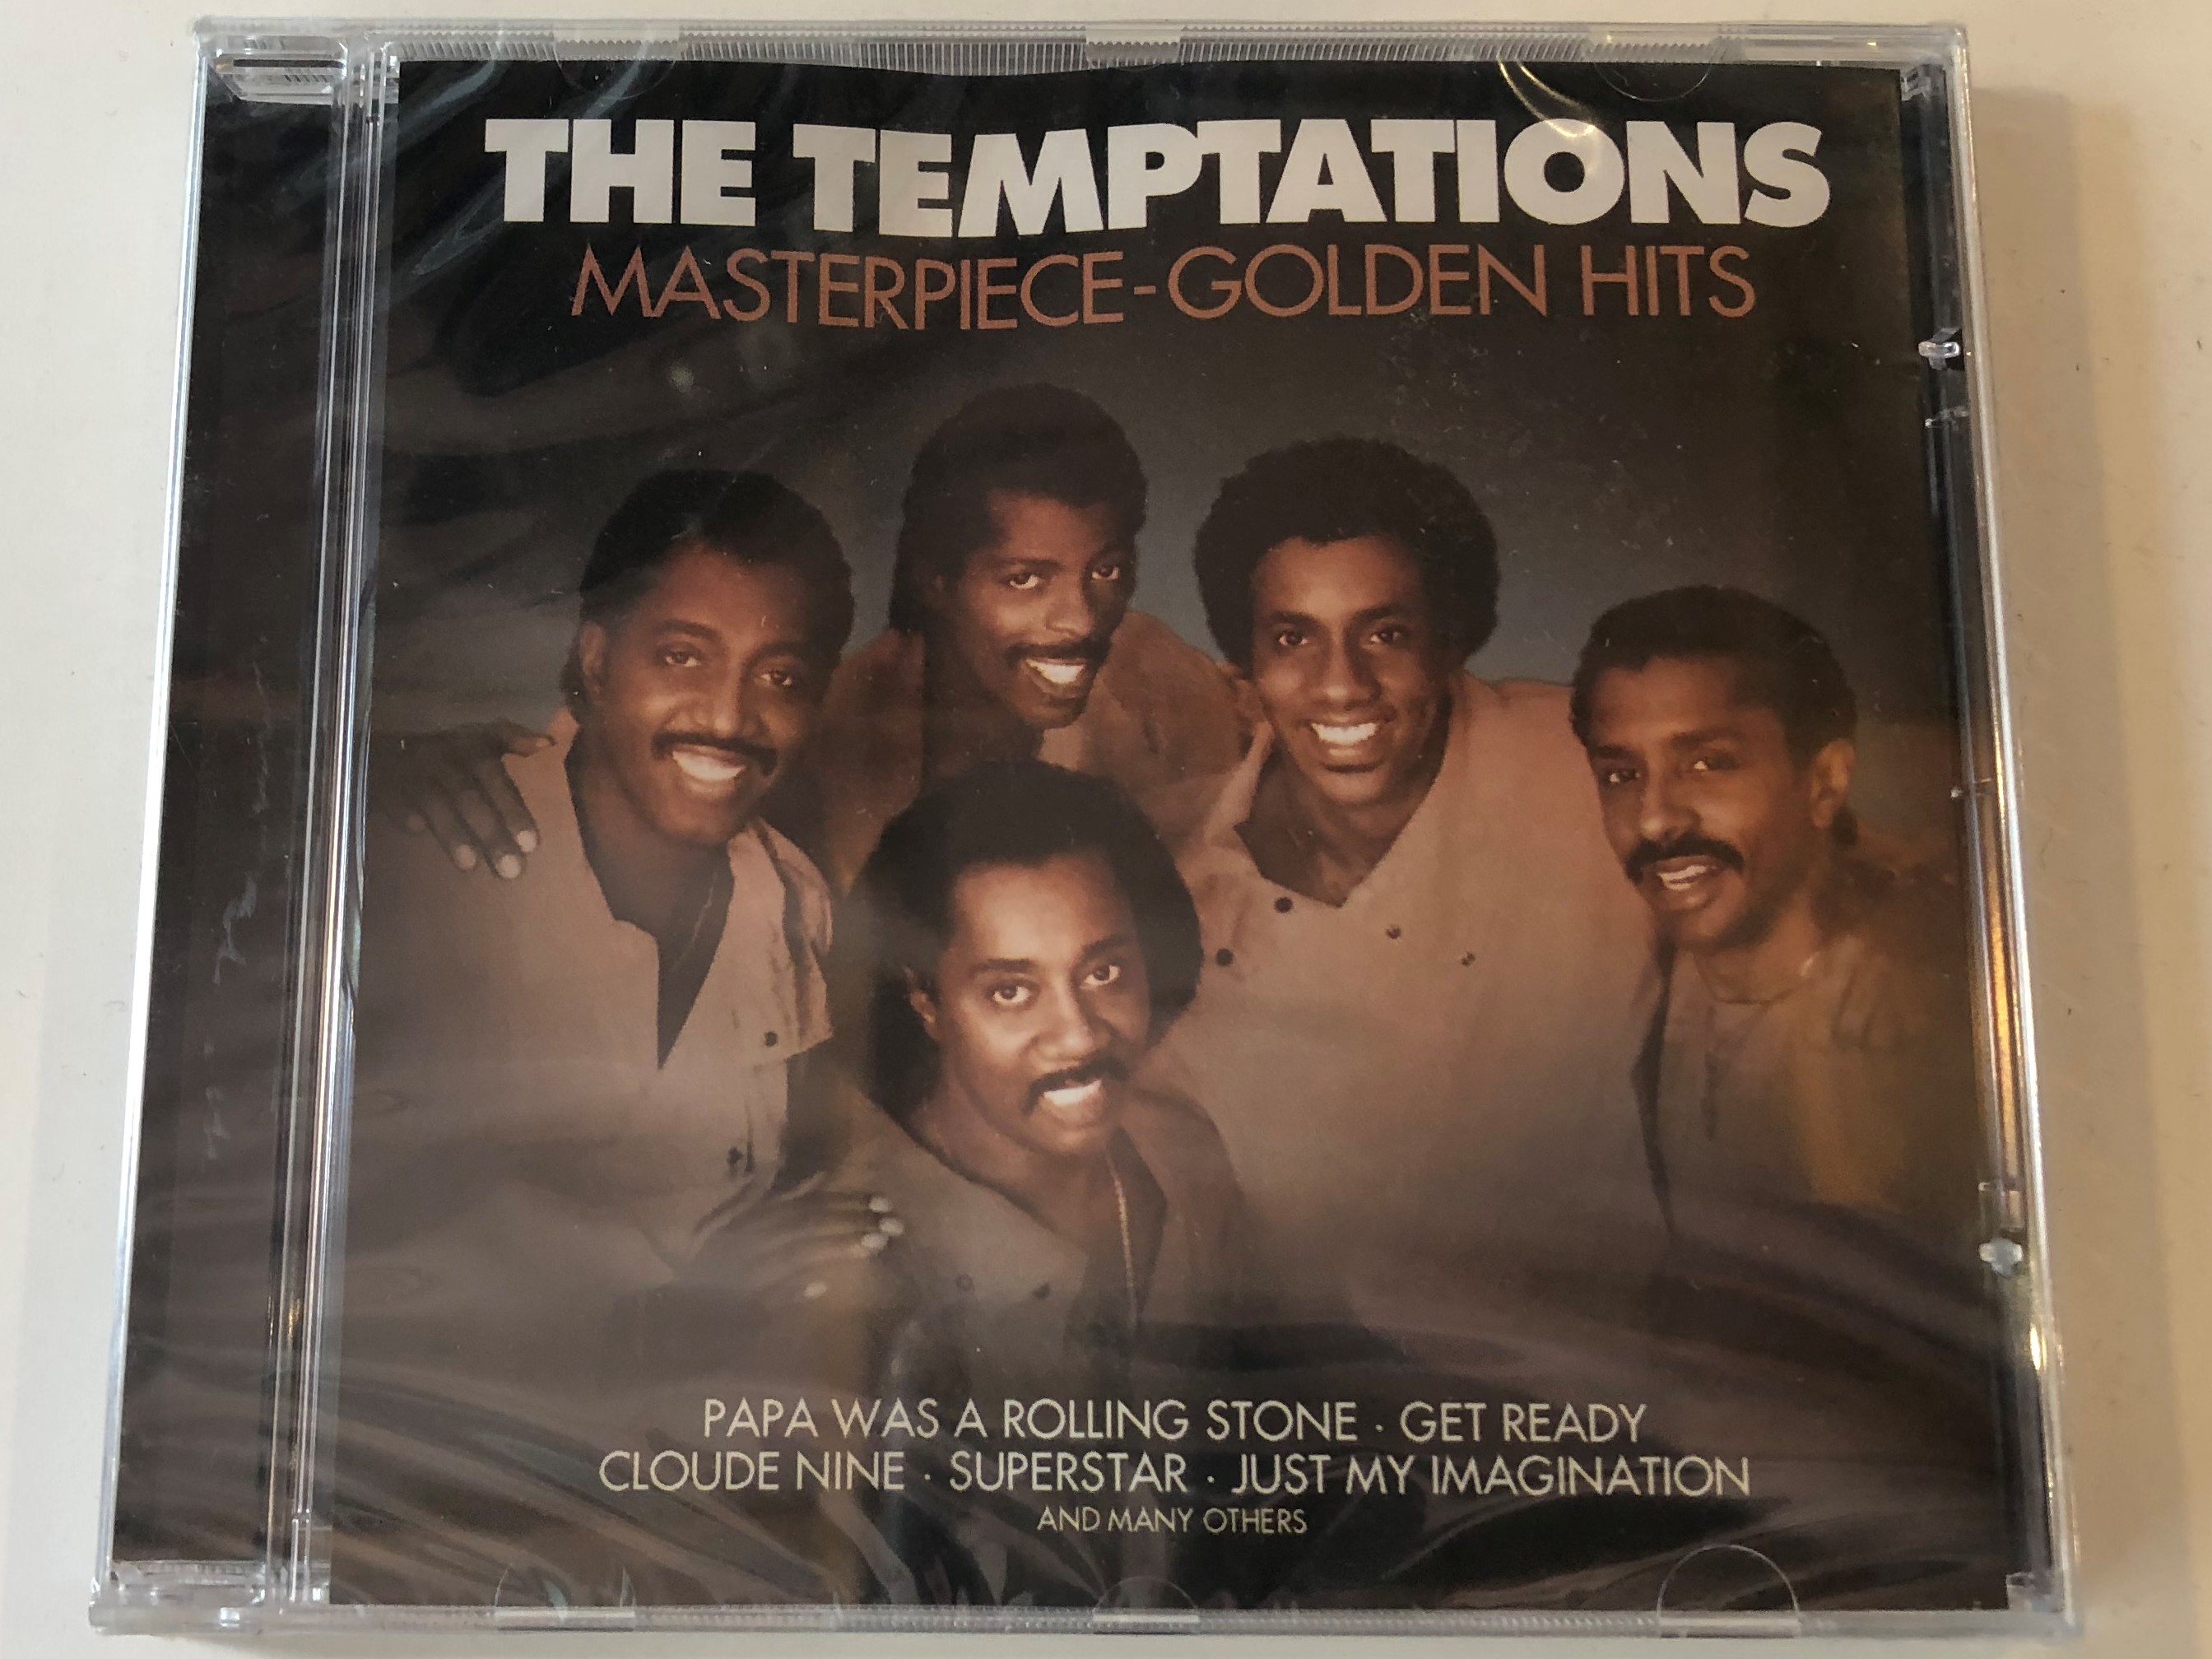 the-temptations-masterpiece-golden-hits-papa-was-a-rolling-stone-get-ready-cloude-nine-superstar-just-my-imagination-and-many-others-eurotrend-audio-cd-cd-142-1-.jpg